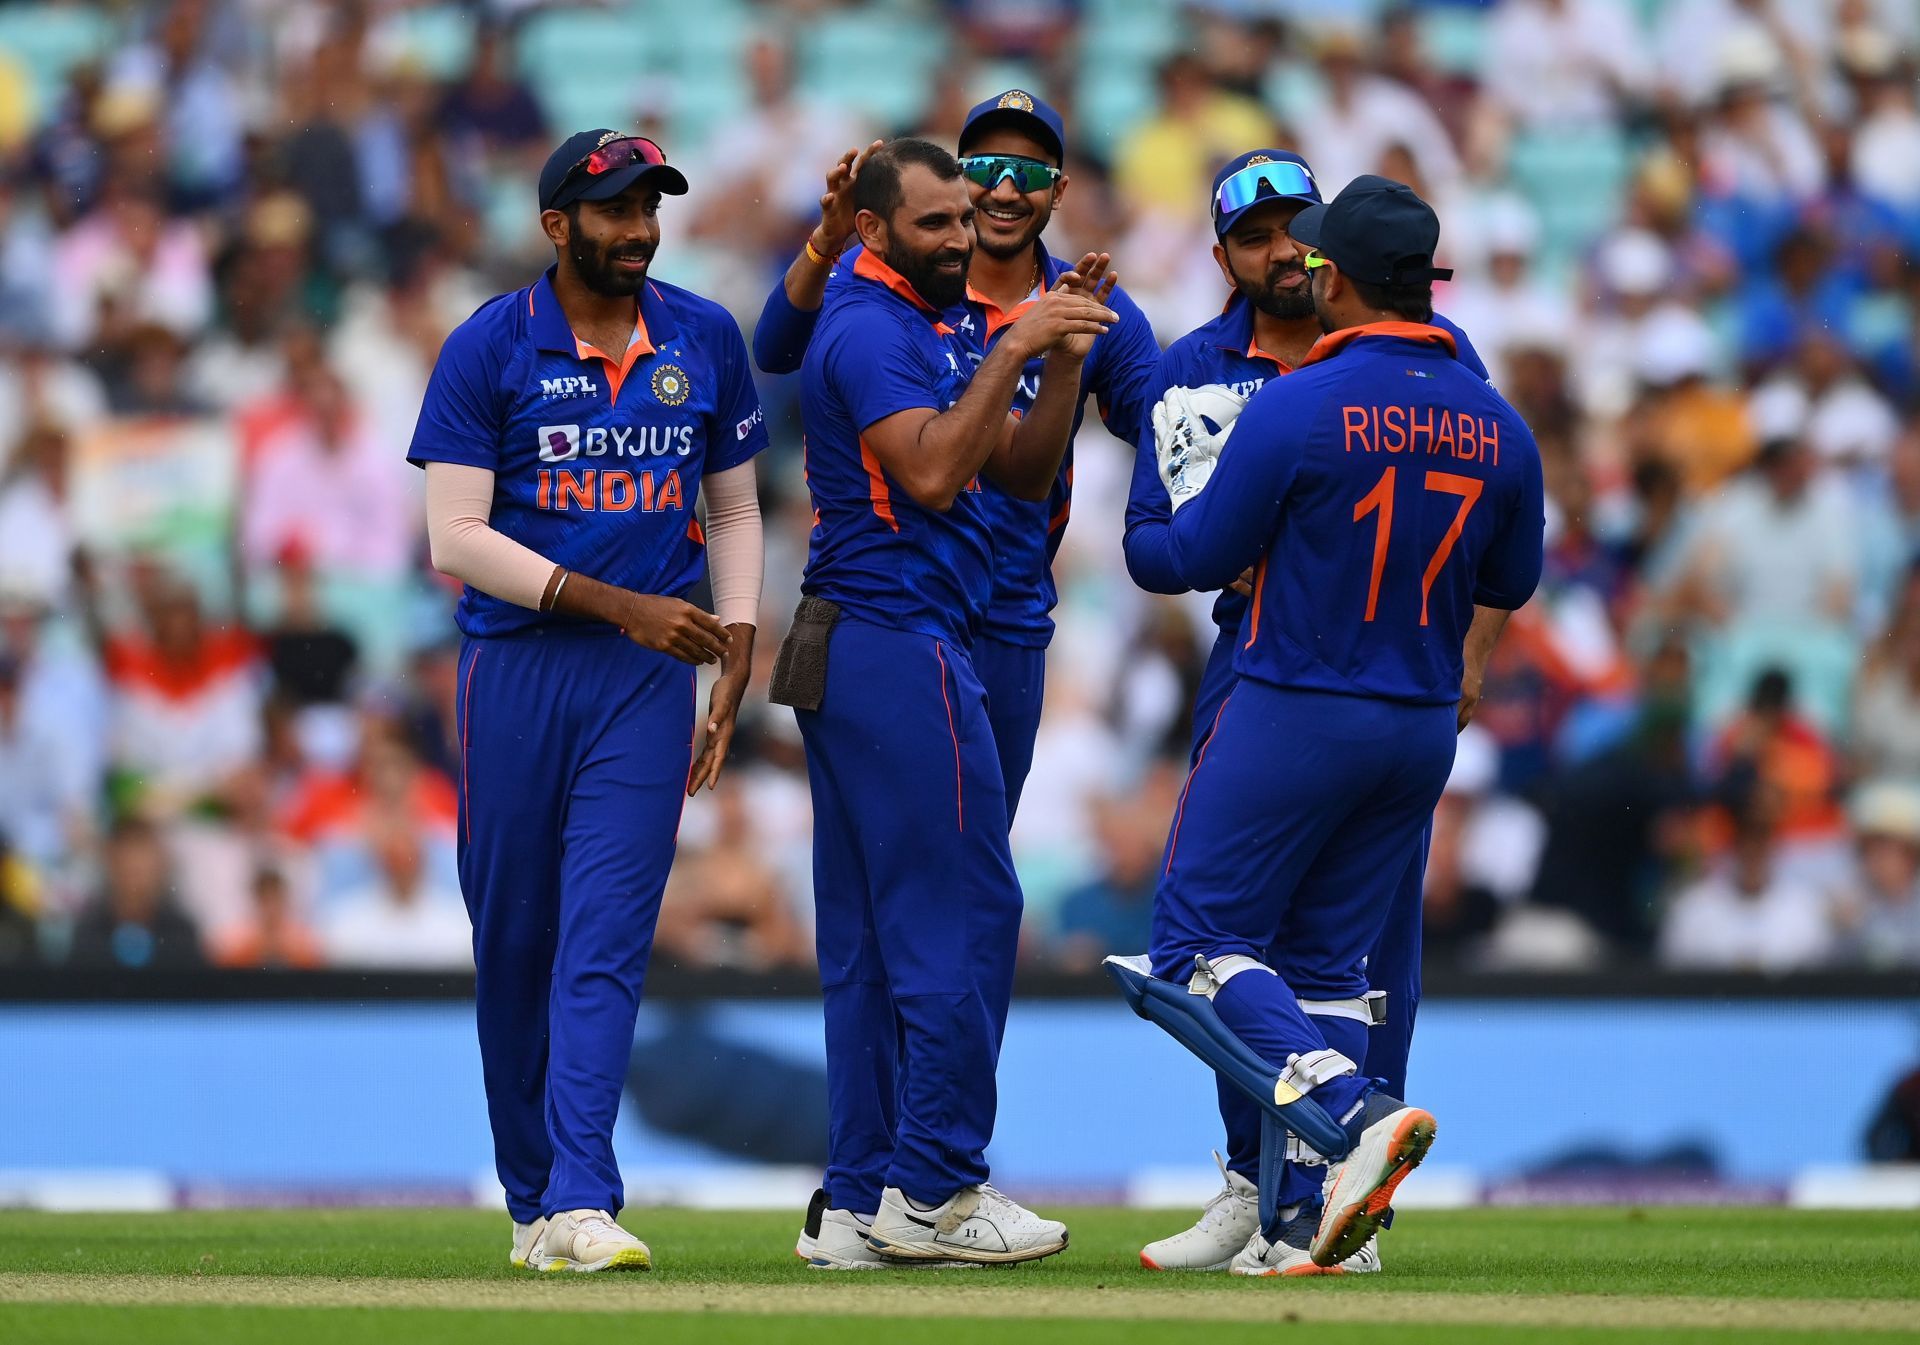 Jasprit Bumrah and Mohammed Shami dismantled the England batting lineup in the first ODI